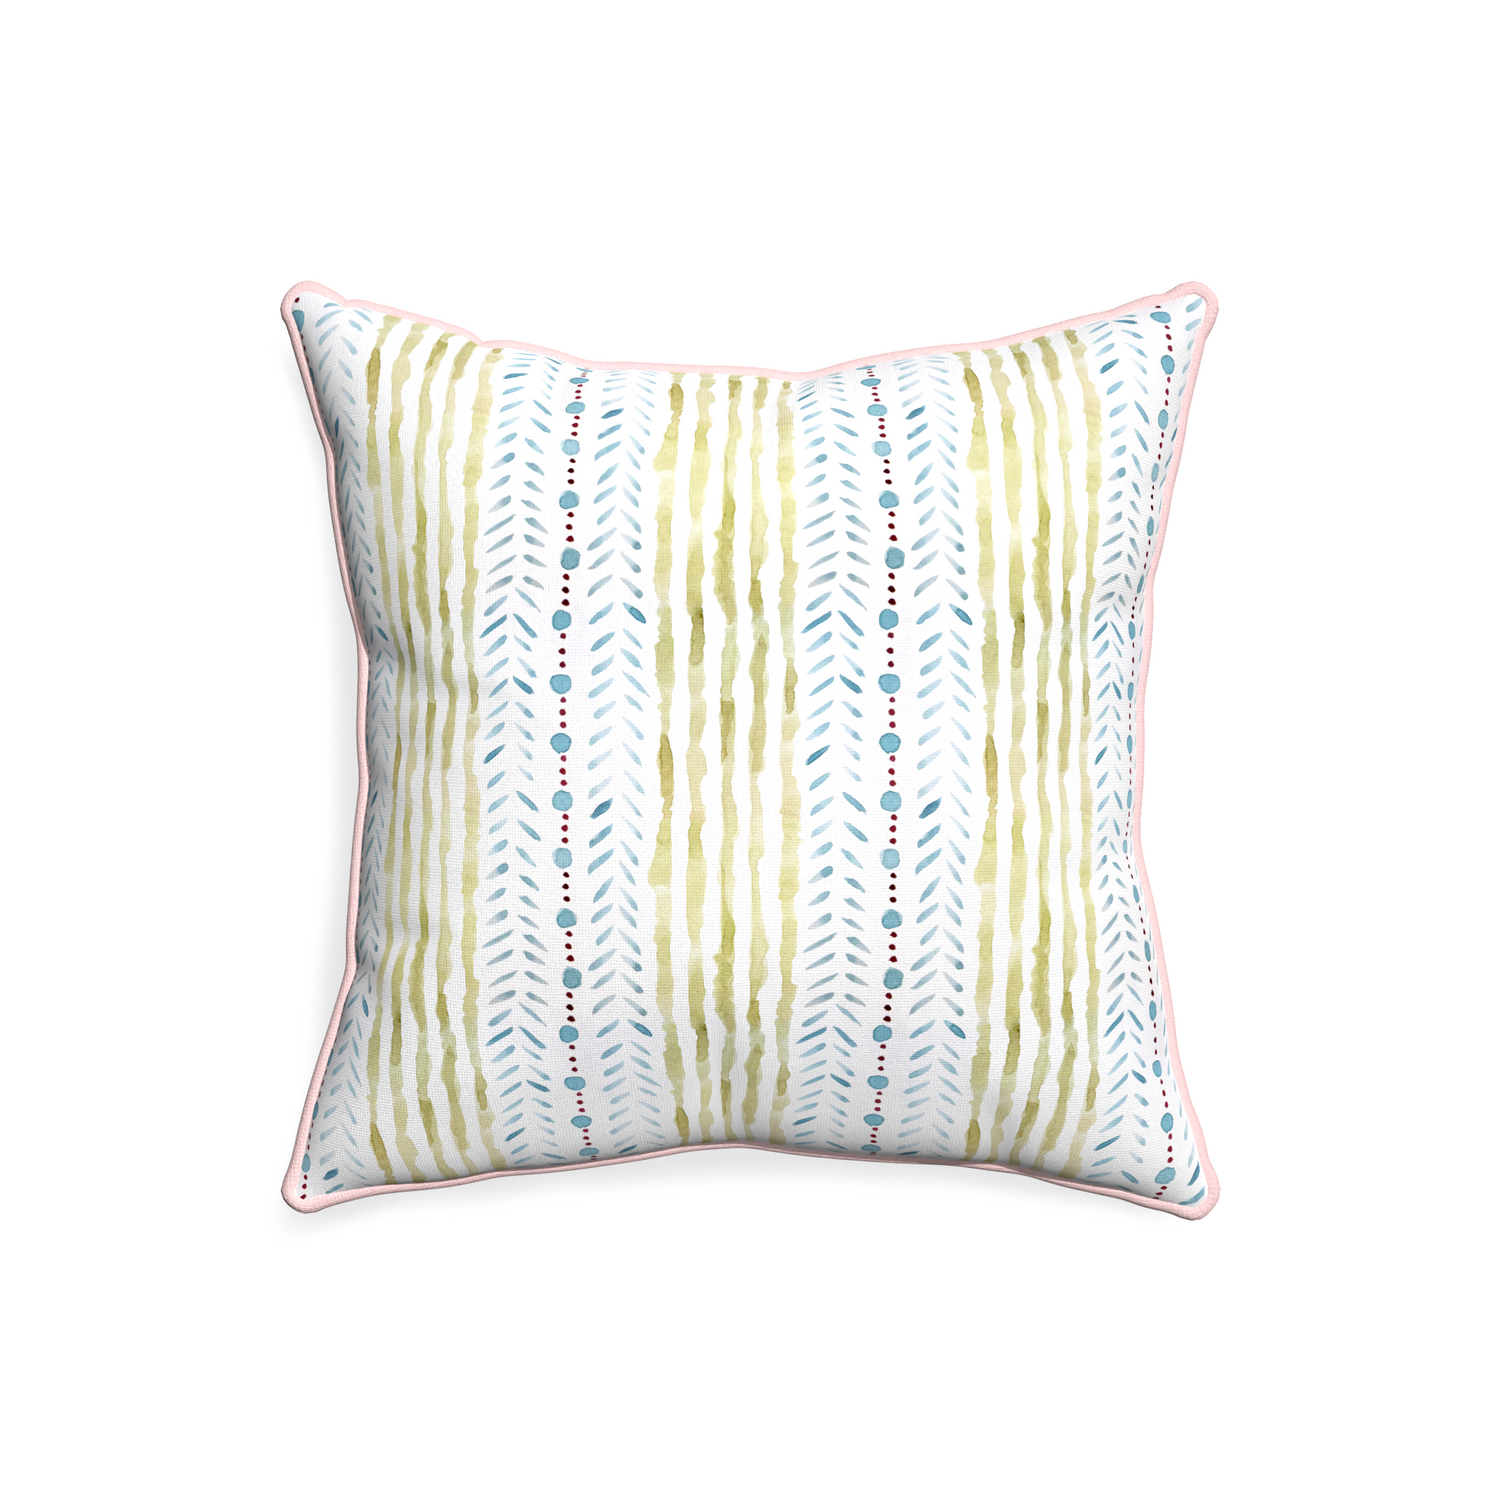 20-square julia custom pillow with petal piping on white background